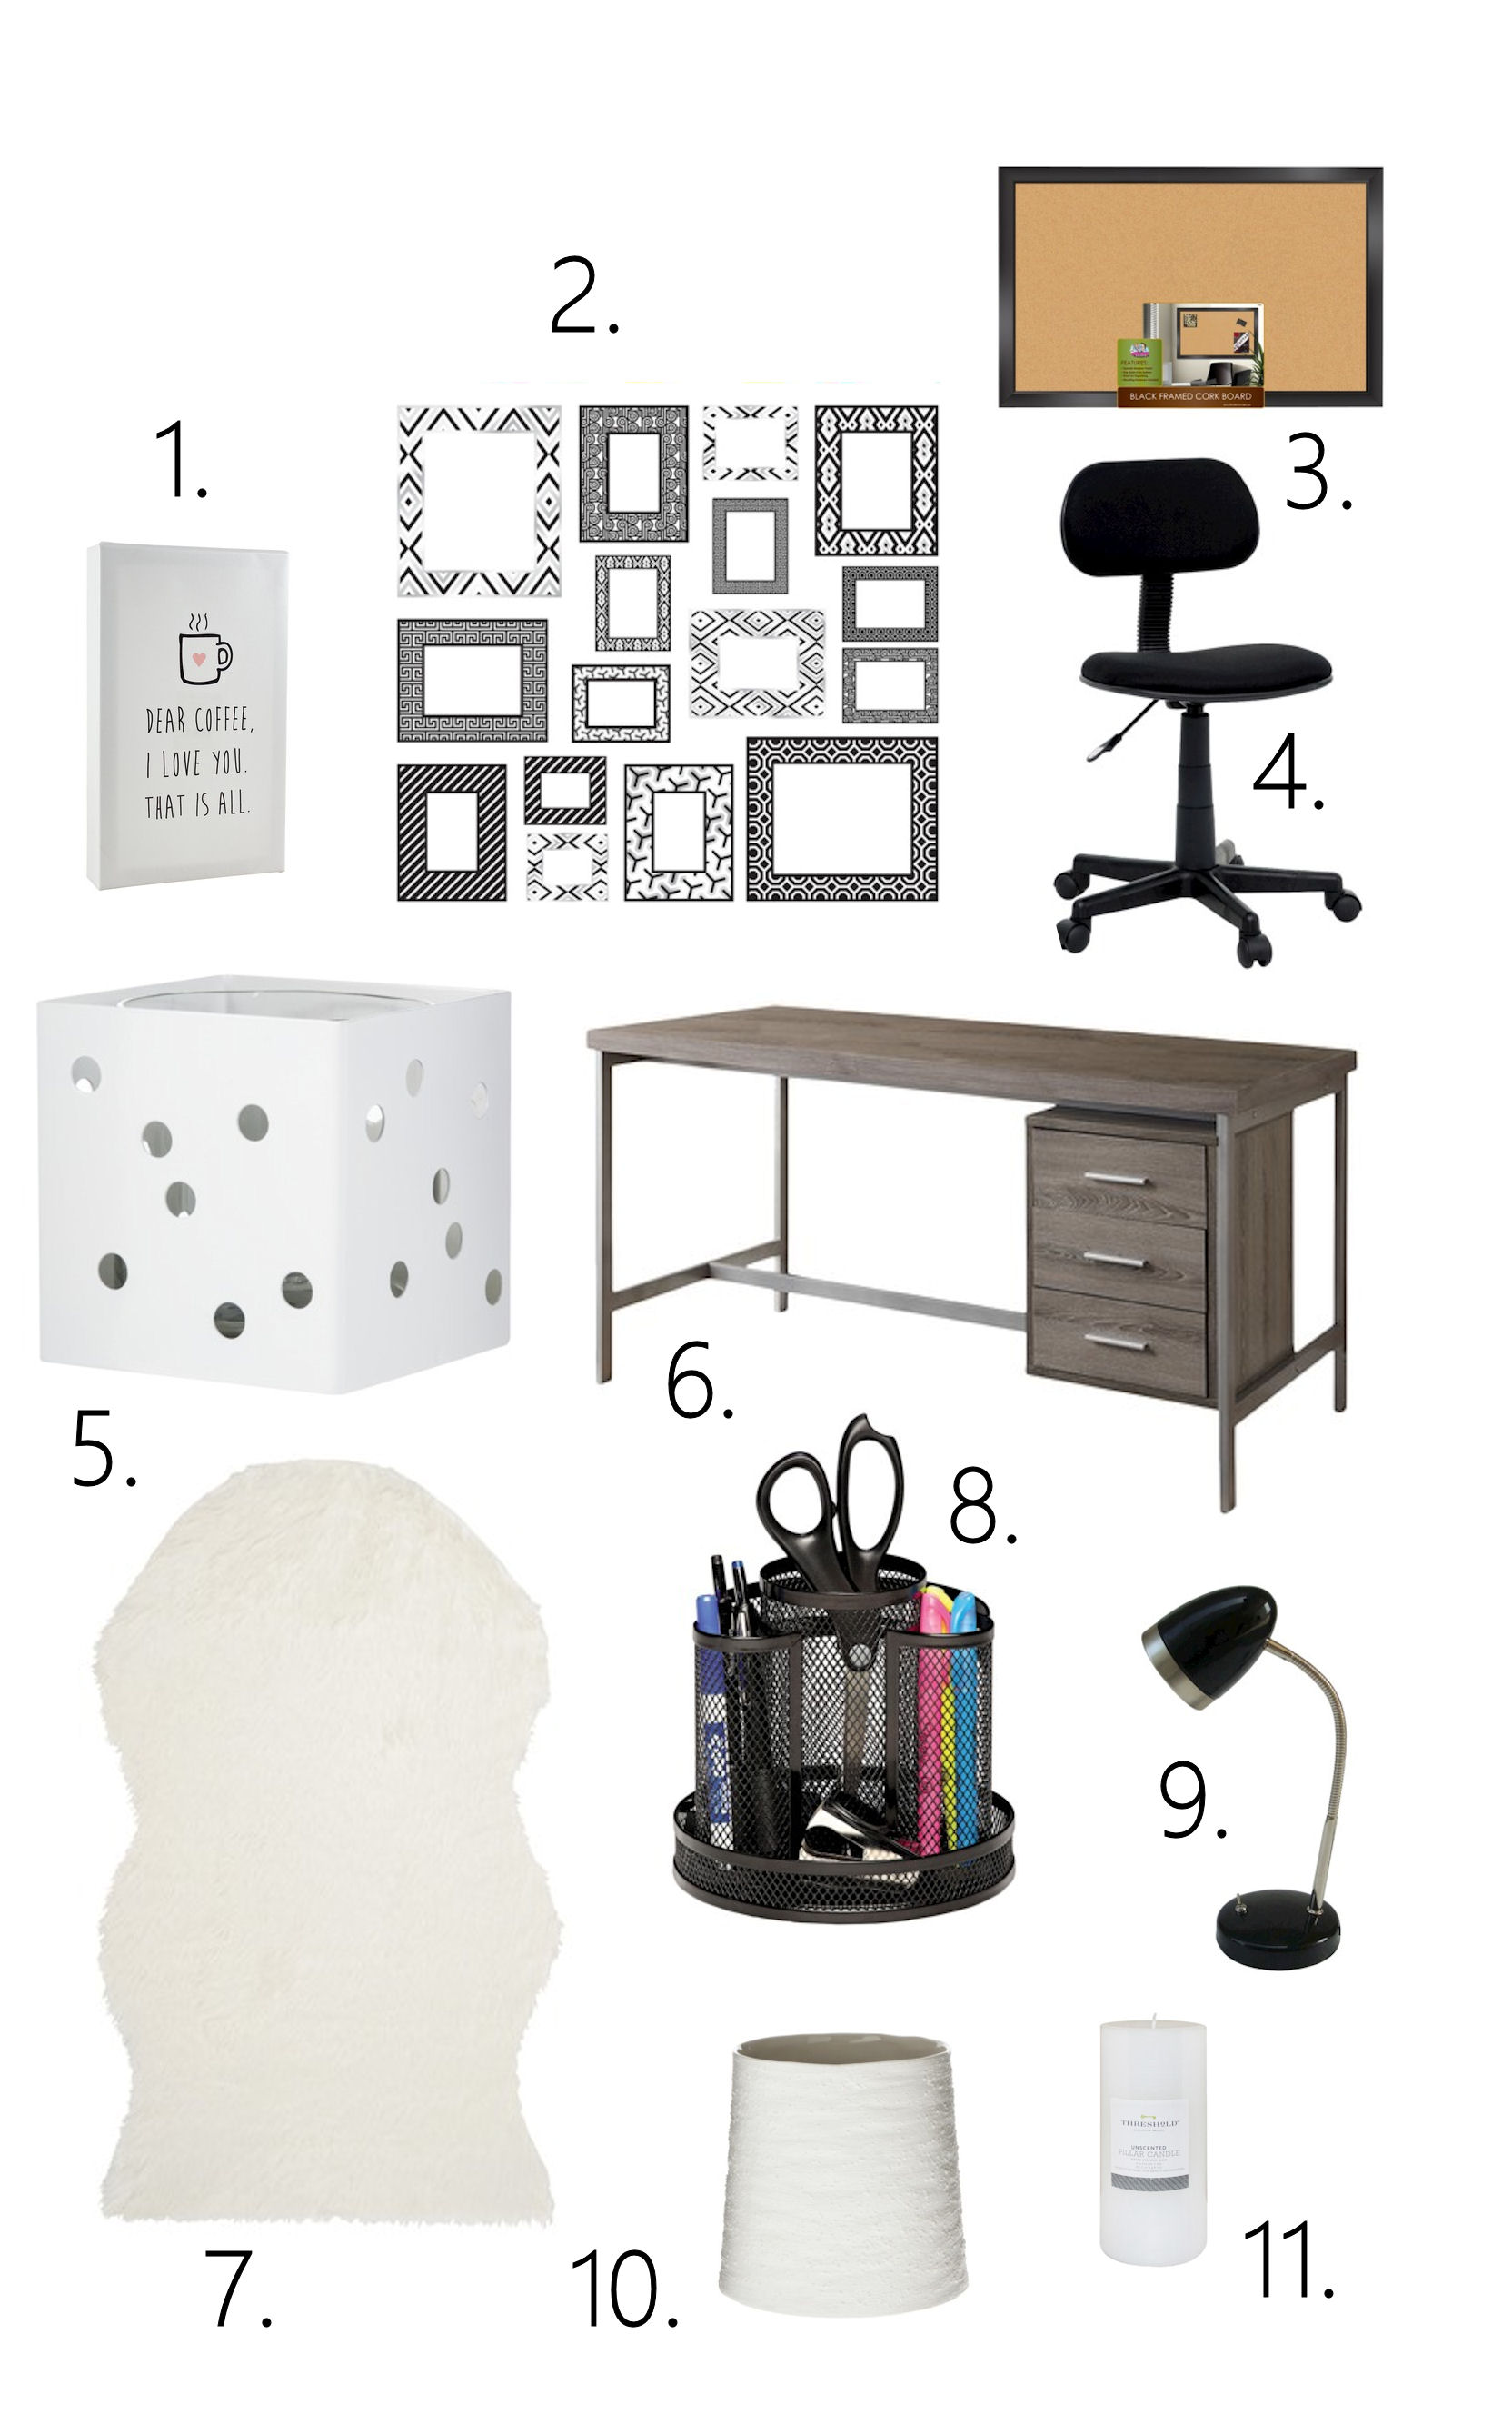 Affordable eDecor Series: Small home office